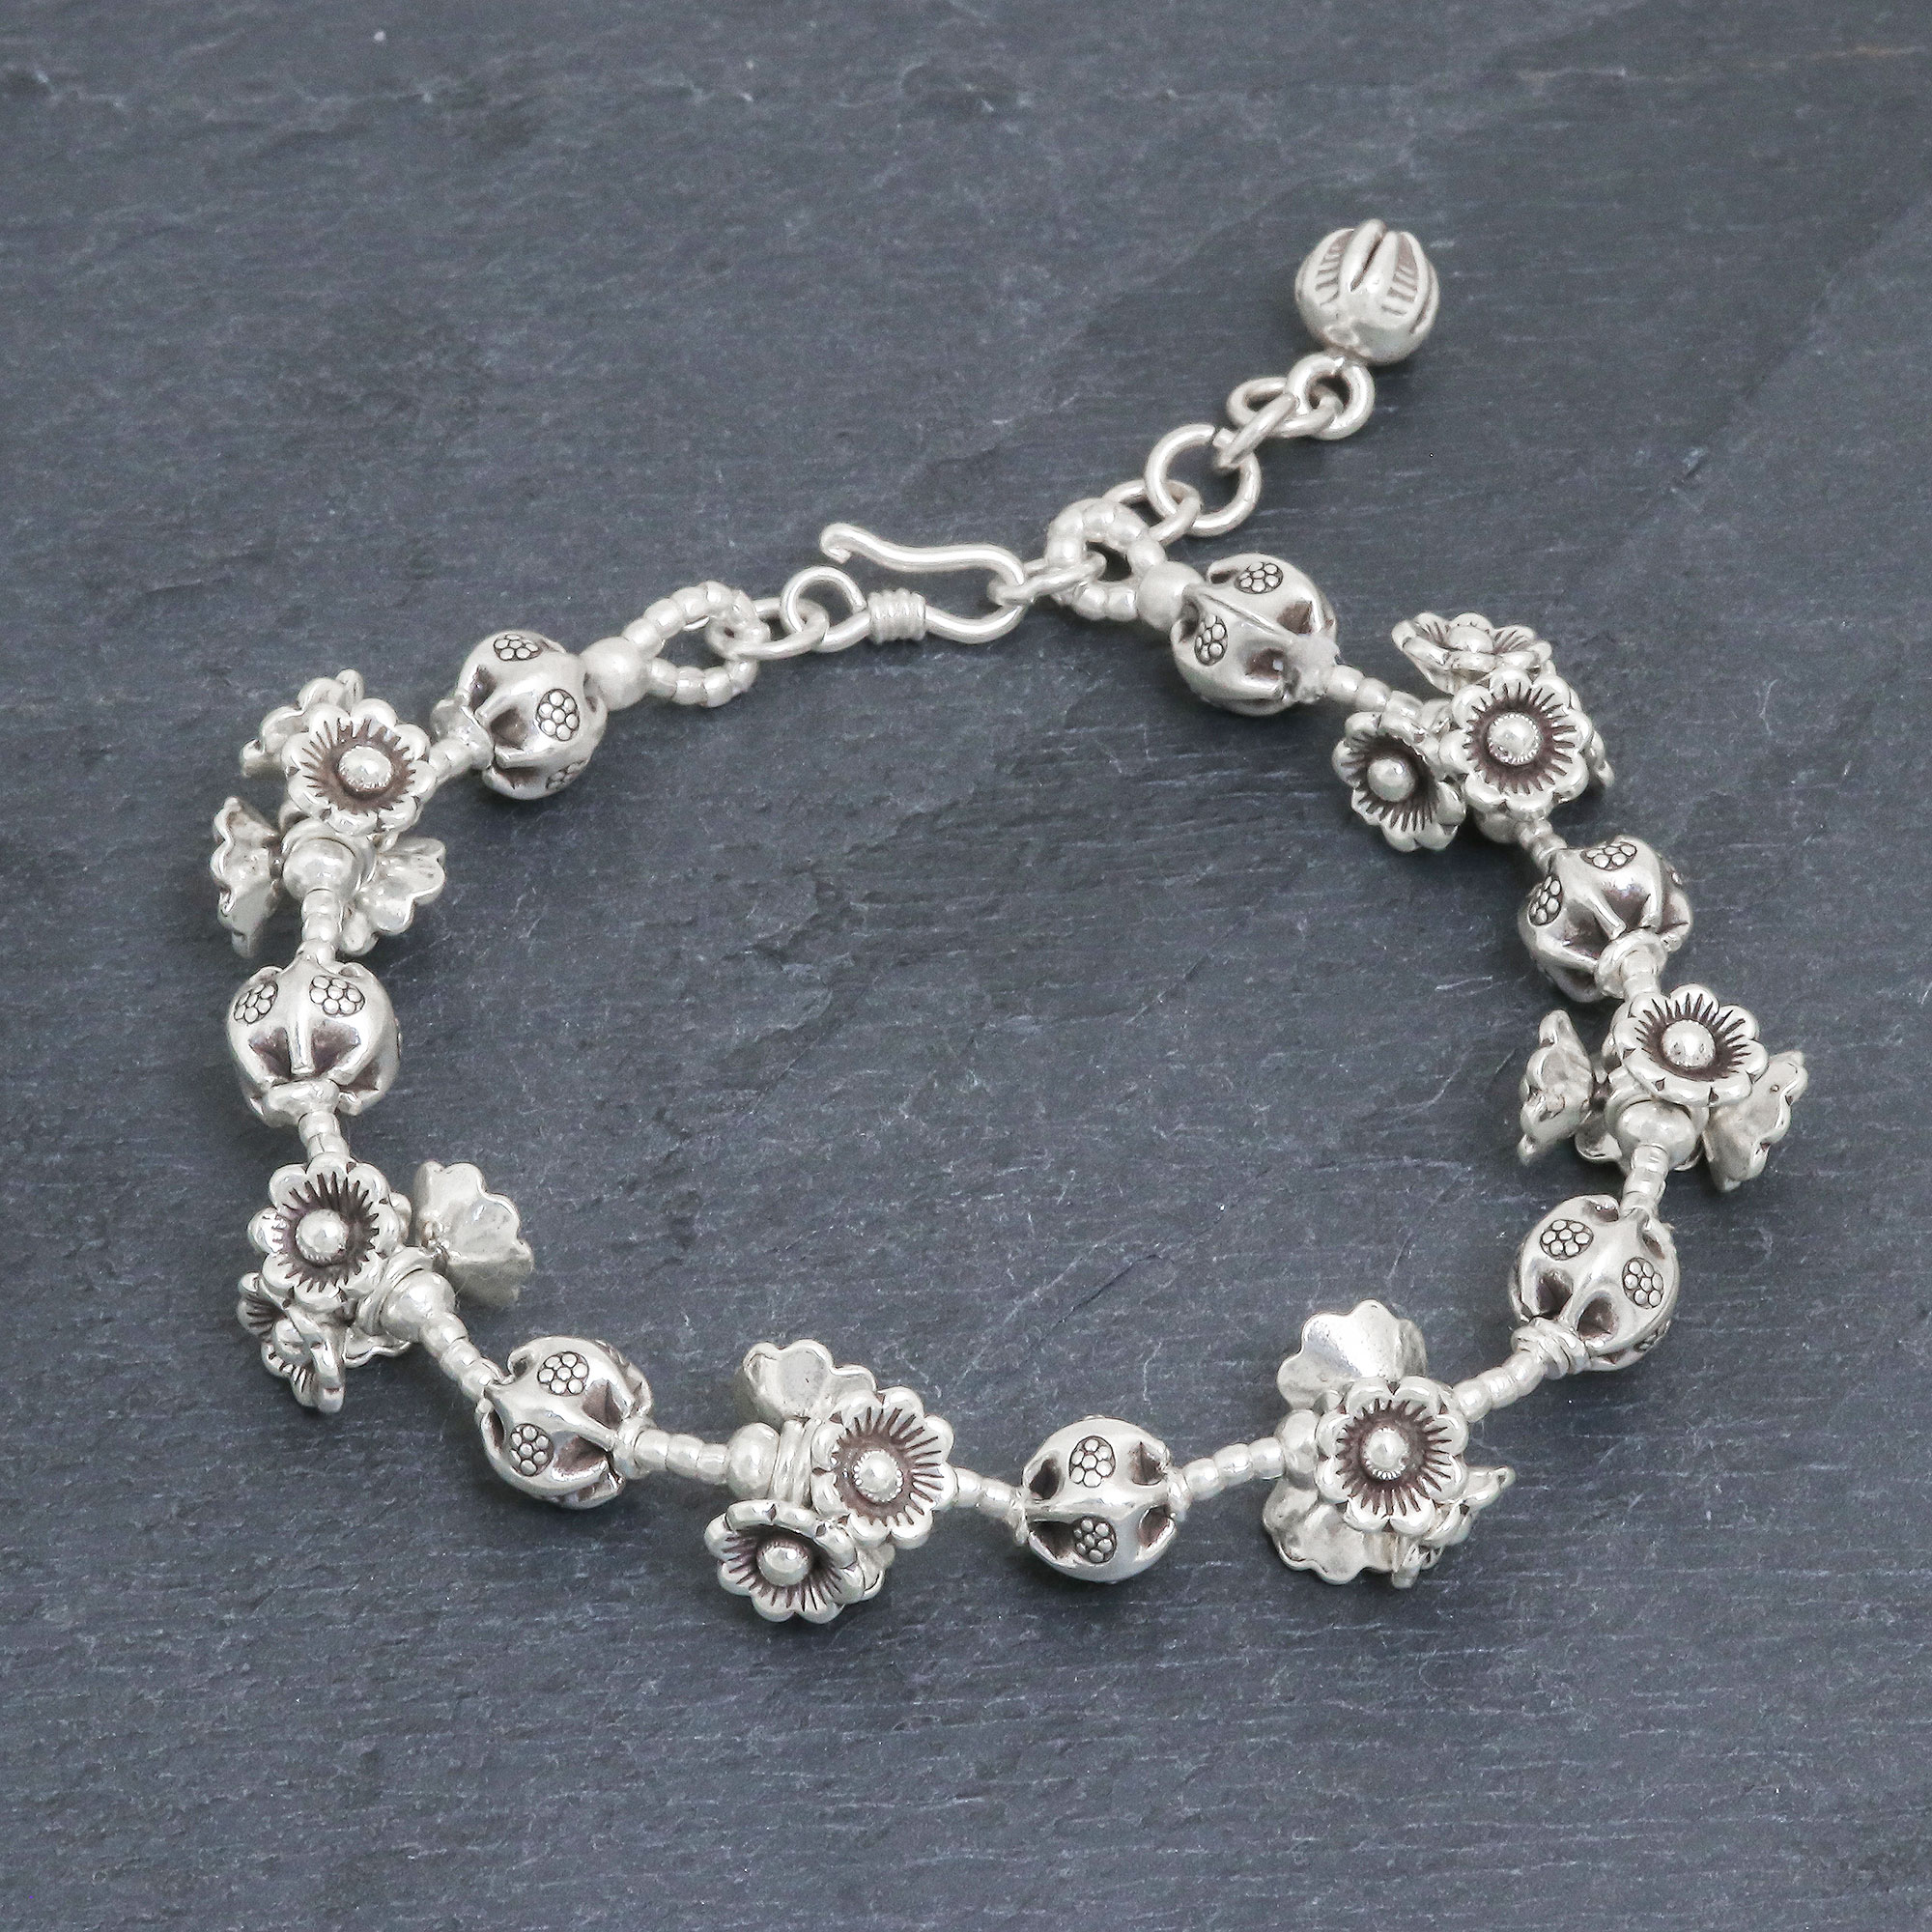 Silver Link Bracelet with Extender Chain from Thailand - Flower Ball